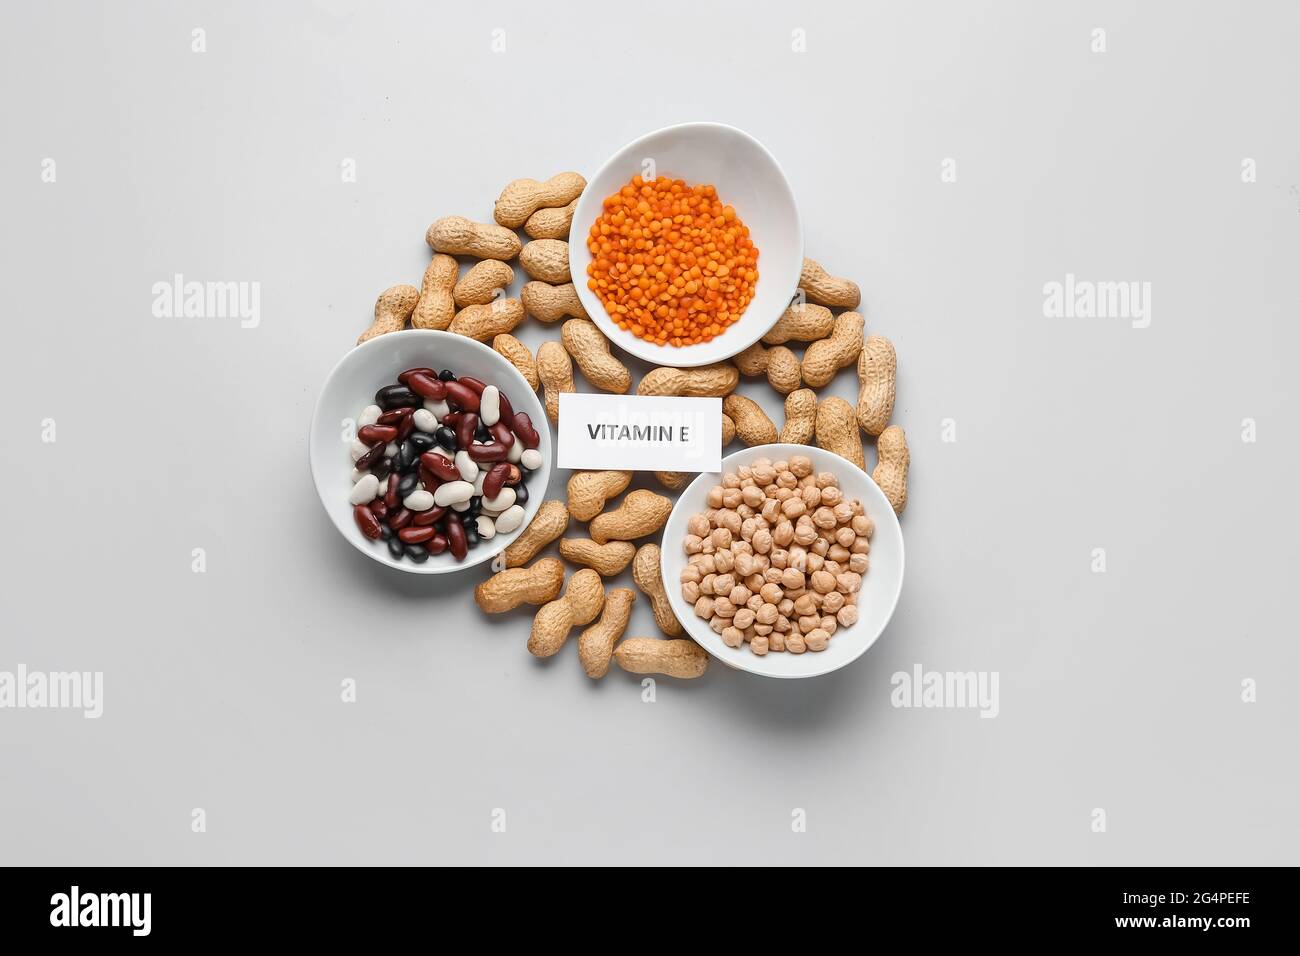 Plates with and different healthy nuts and beans rich in vitamin E on light background Stock Photo